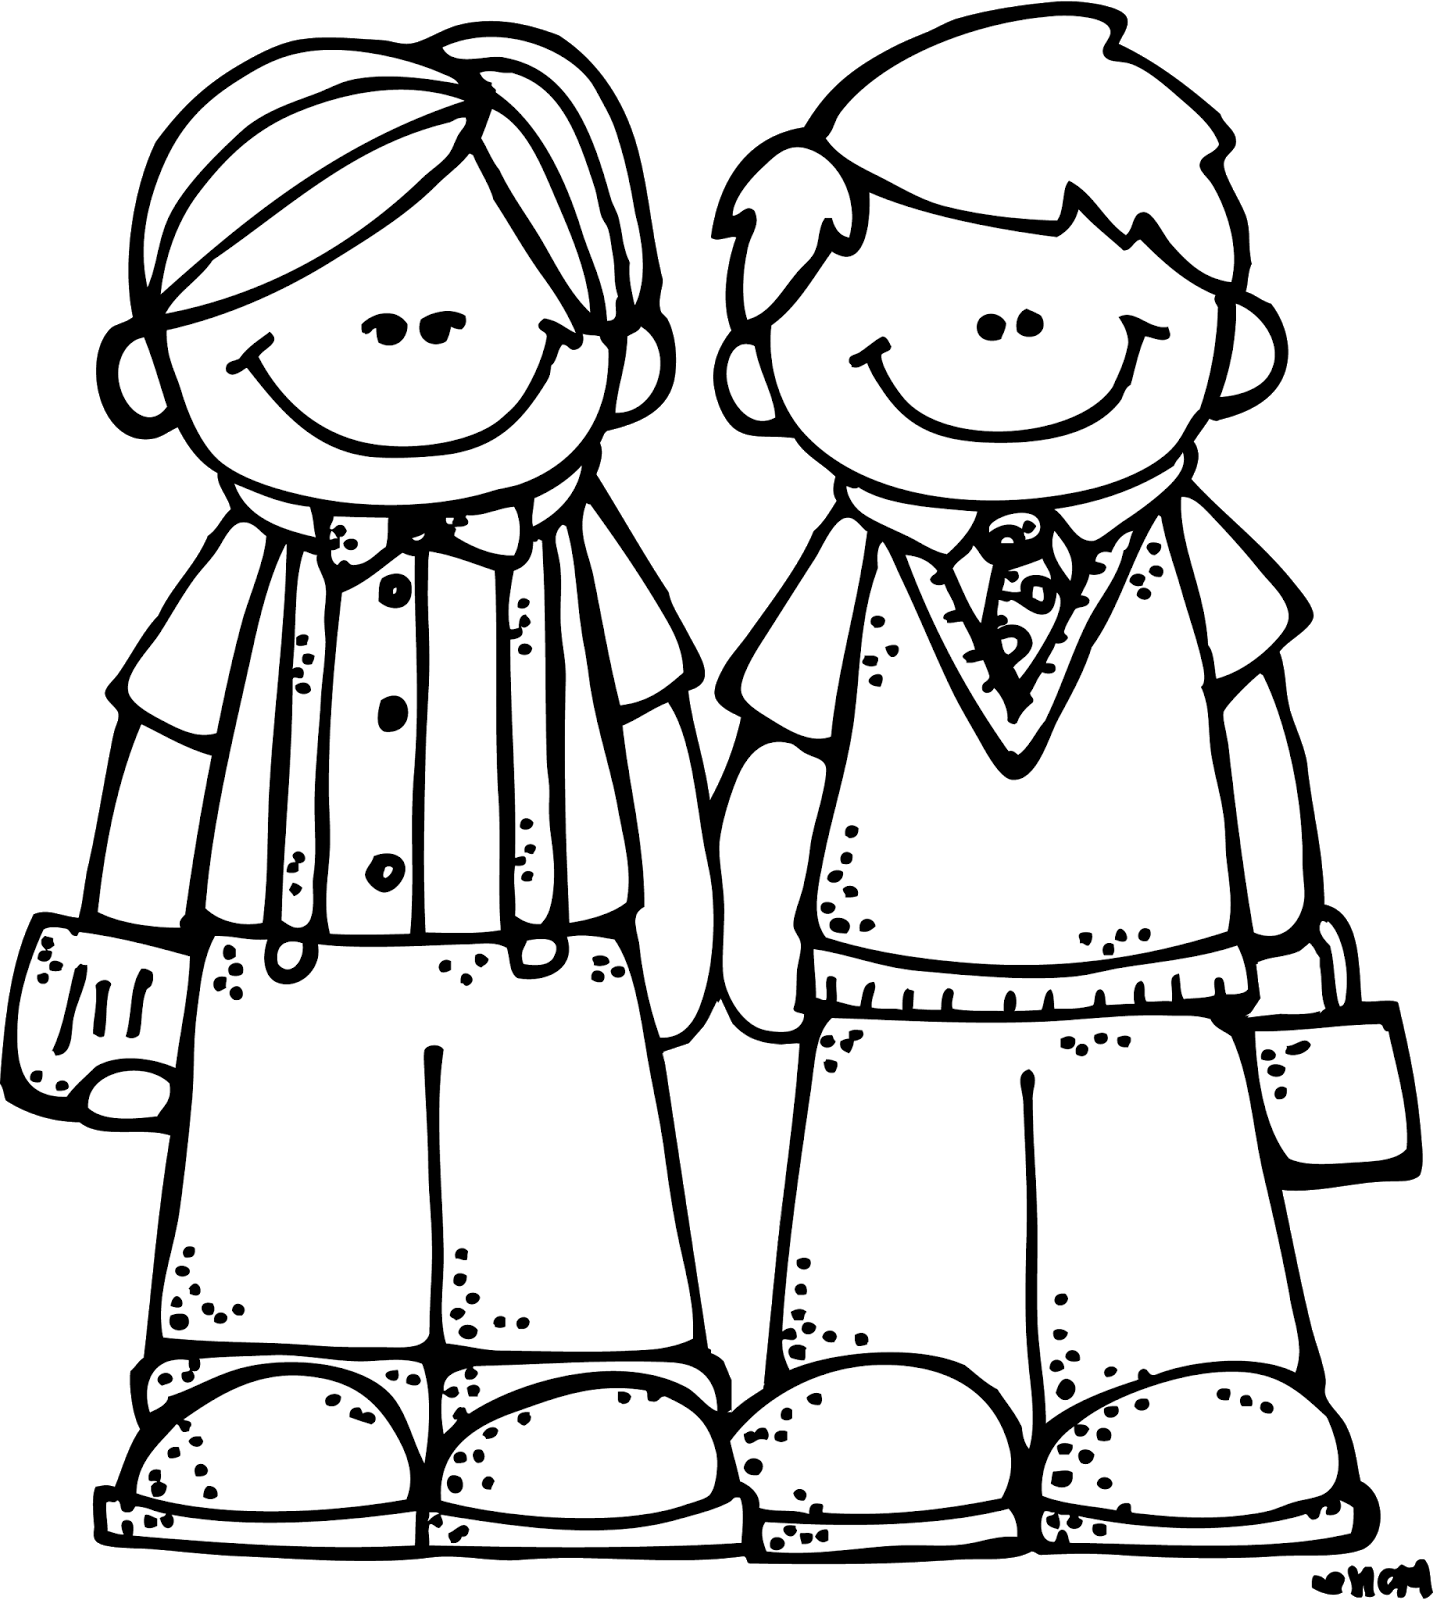 Friendship clipart black and white, Friendship black and